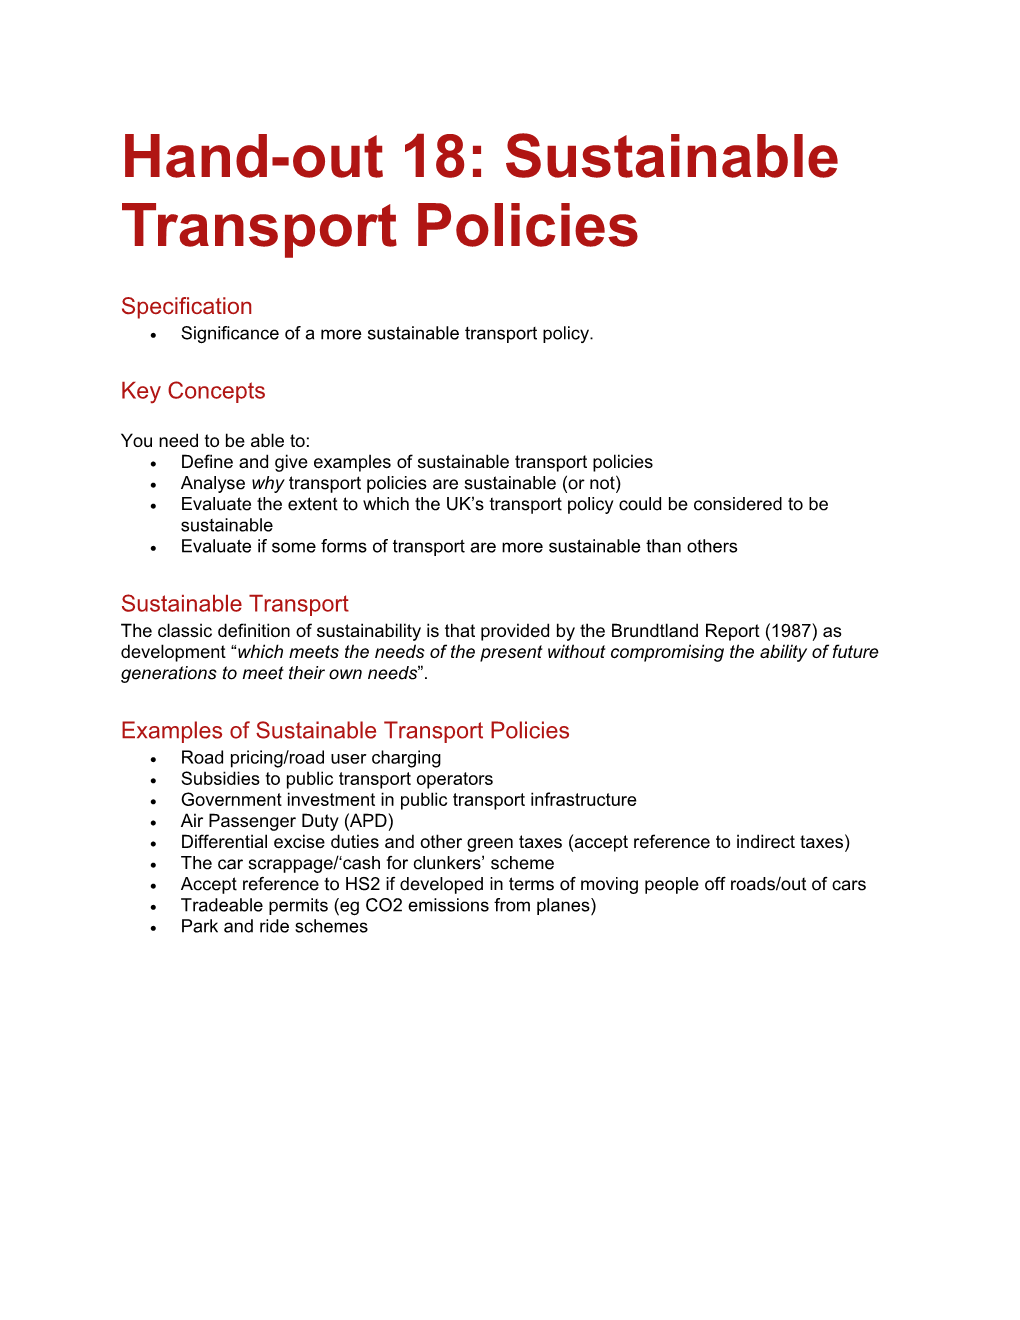 Hand-Out 18: Sustainable Transport Policies